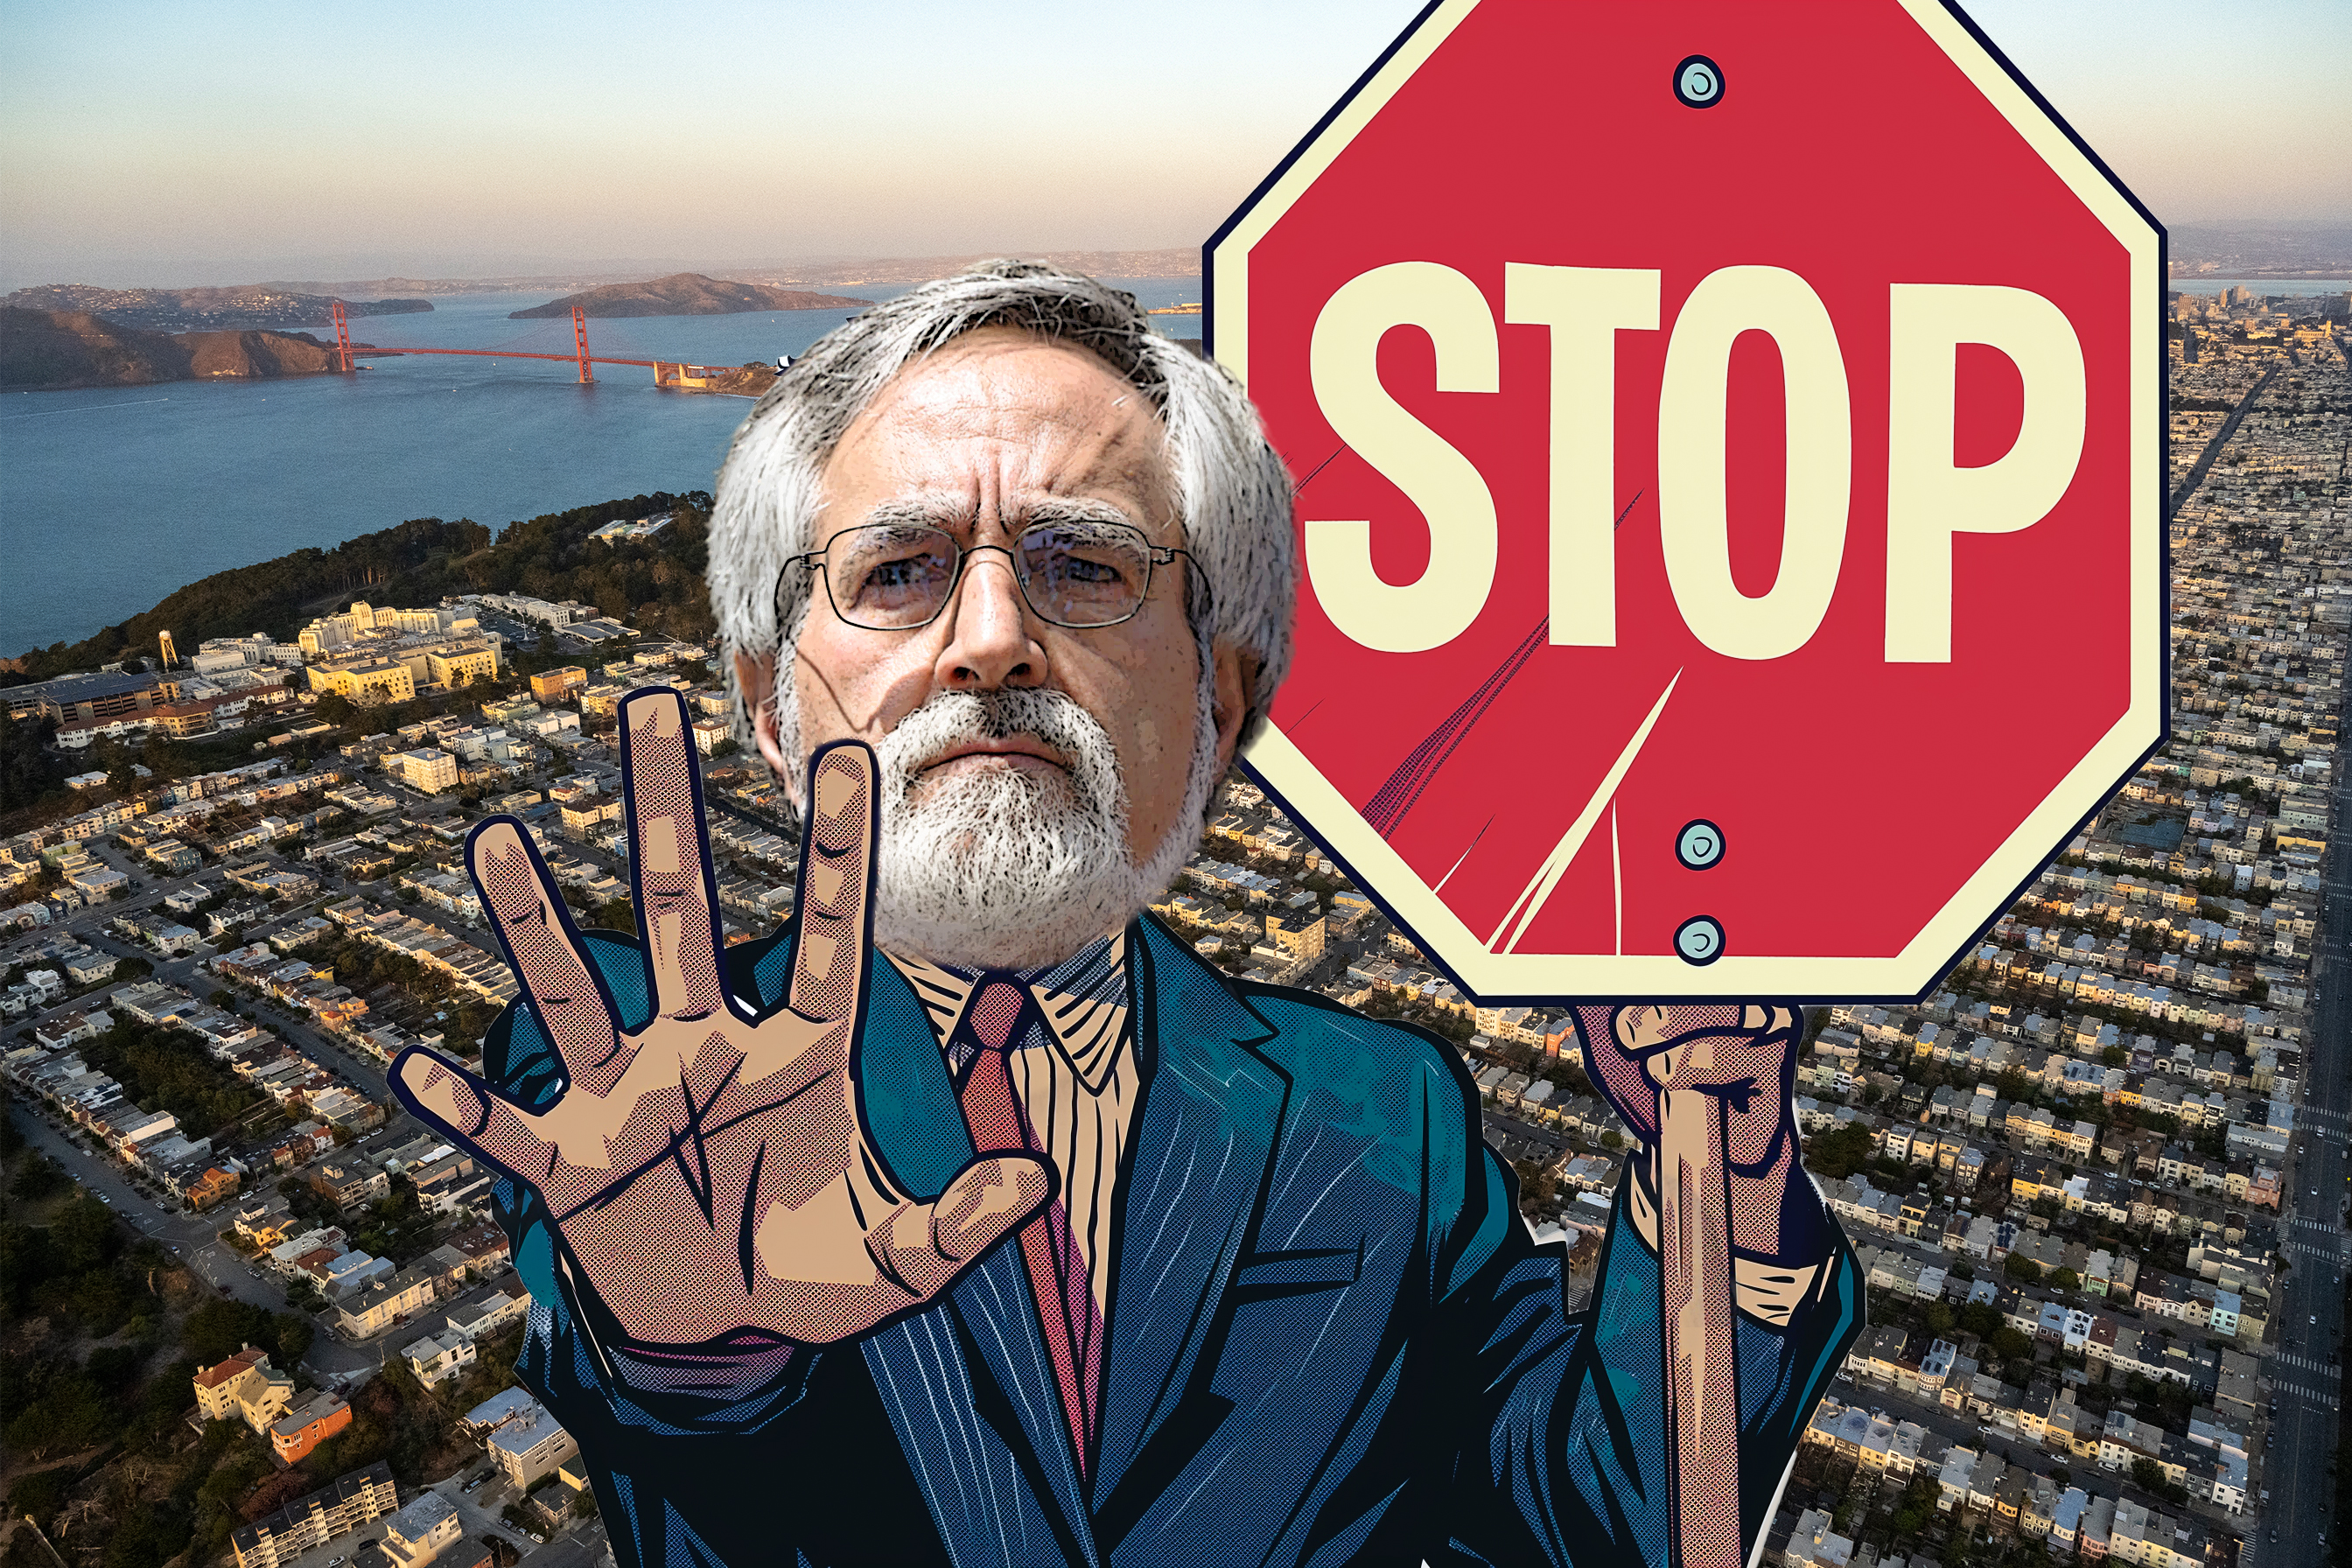 The image shows a man with gray hair and a beard, holding a large "STOP" sign, with a comic-style hand raised in a stop gesture, against an aerial cityscape.